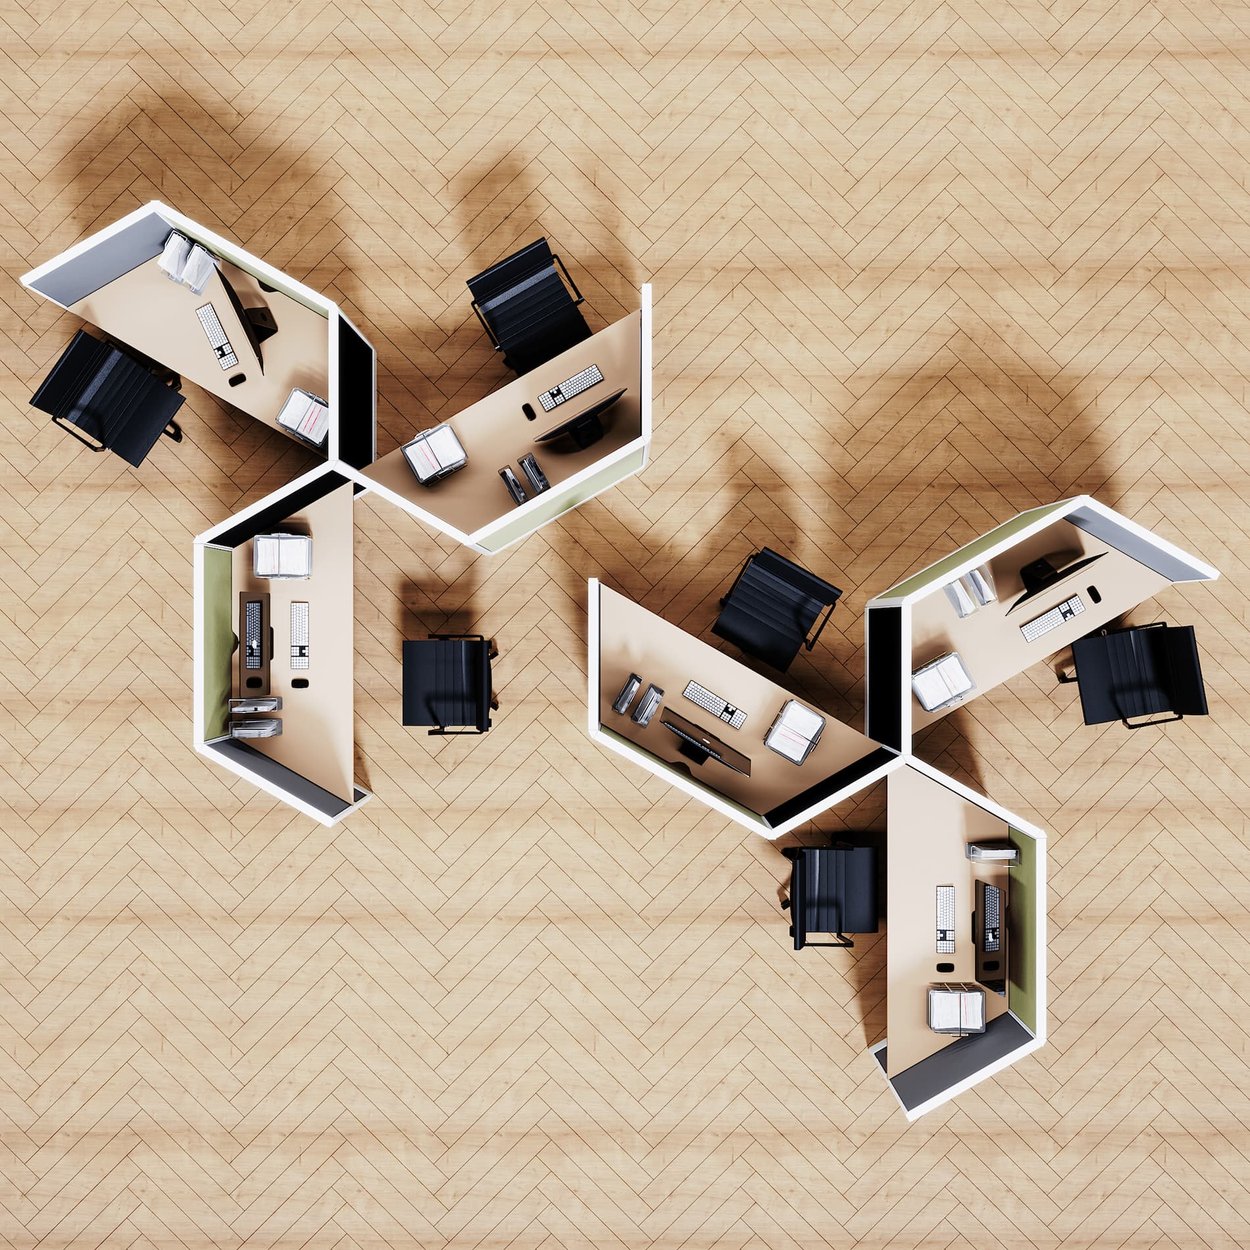 How To Create Your Office Furniture Layout?